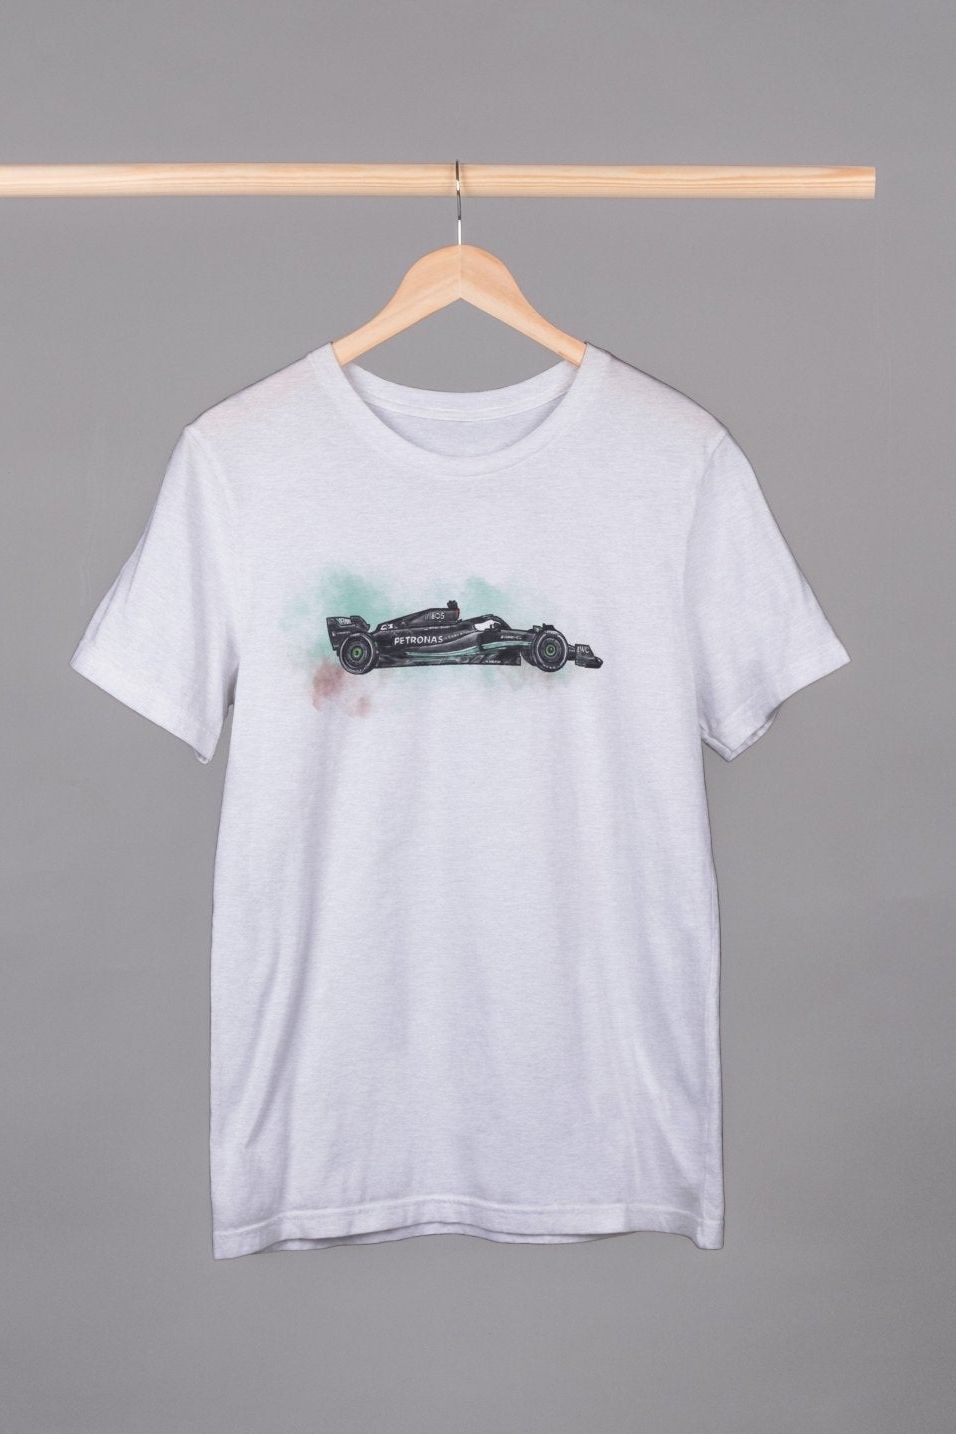 Racing fan gifts: Formula One Mercedes George Russell T-shirt 